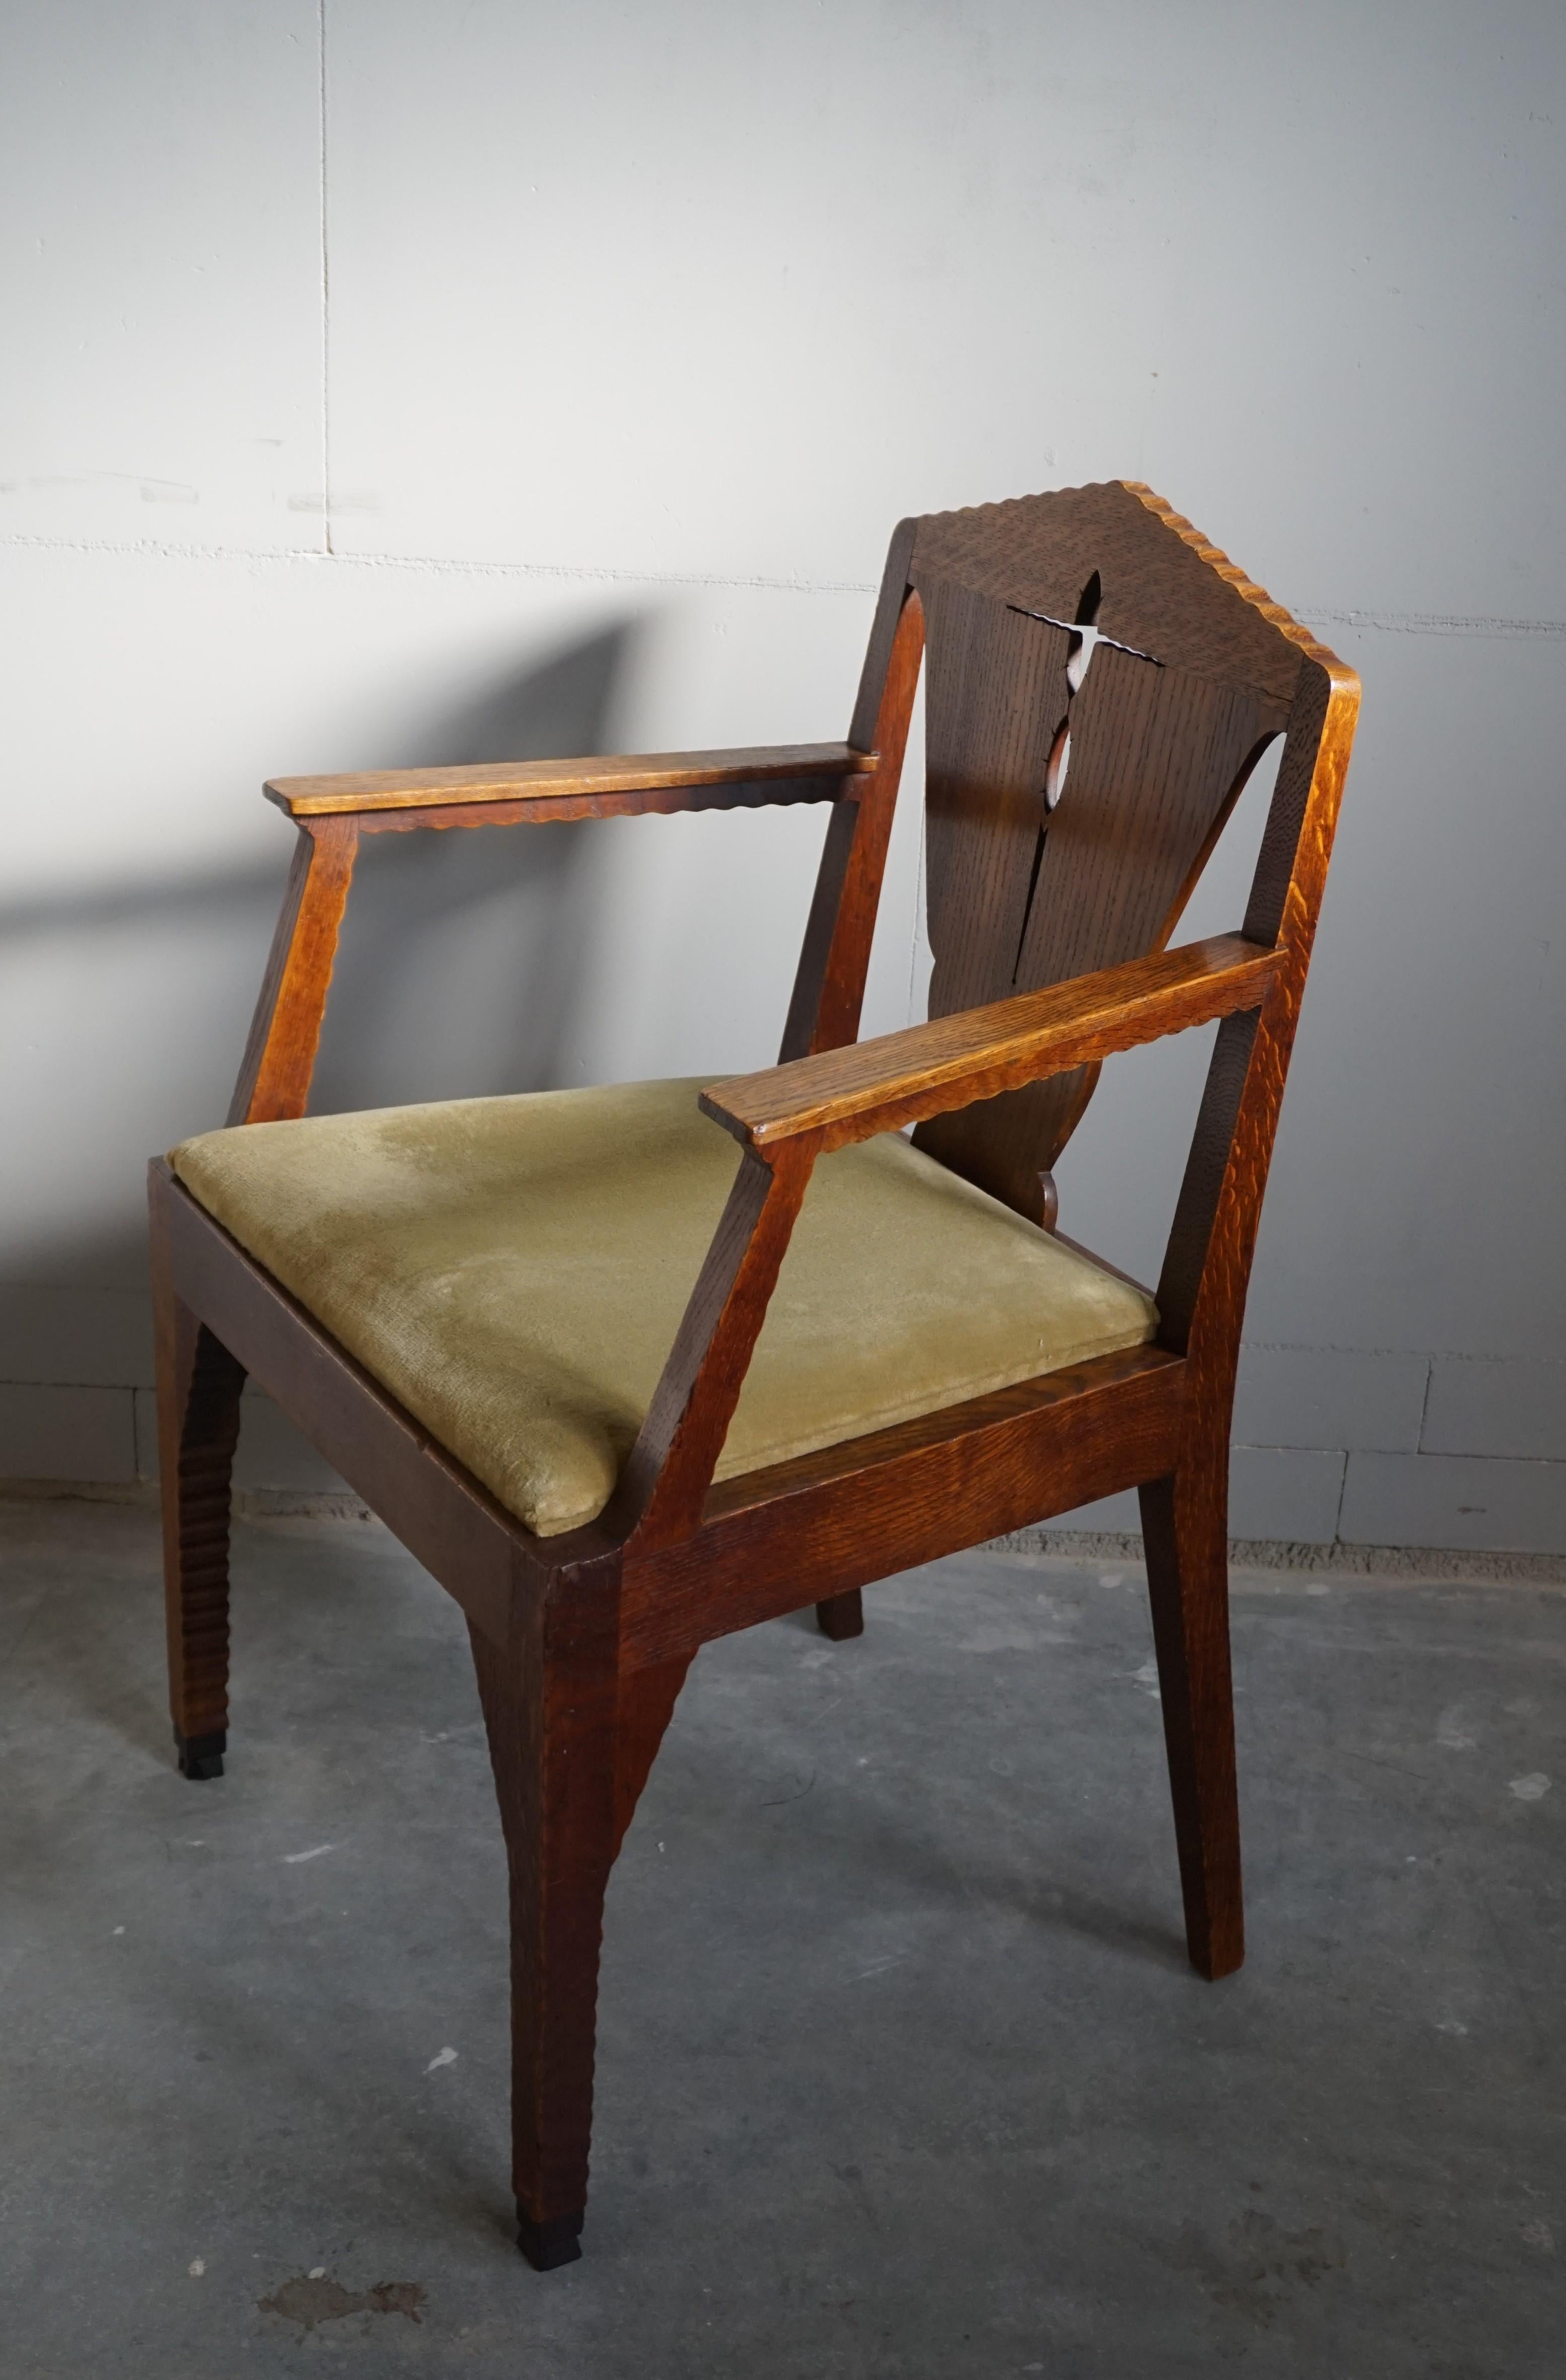 Brilliant Design Dutch Arts & Crafts Oak Desk Chair w. Original Upholstery 1910s In Good Condition For Sale In Lisse, NL